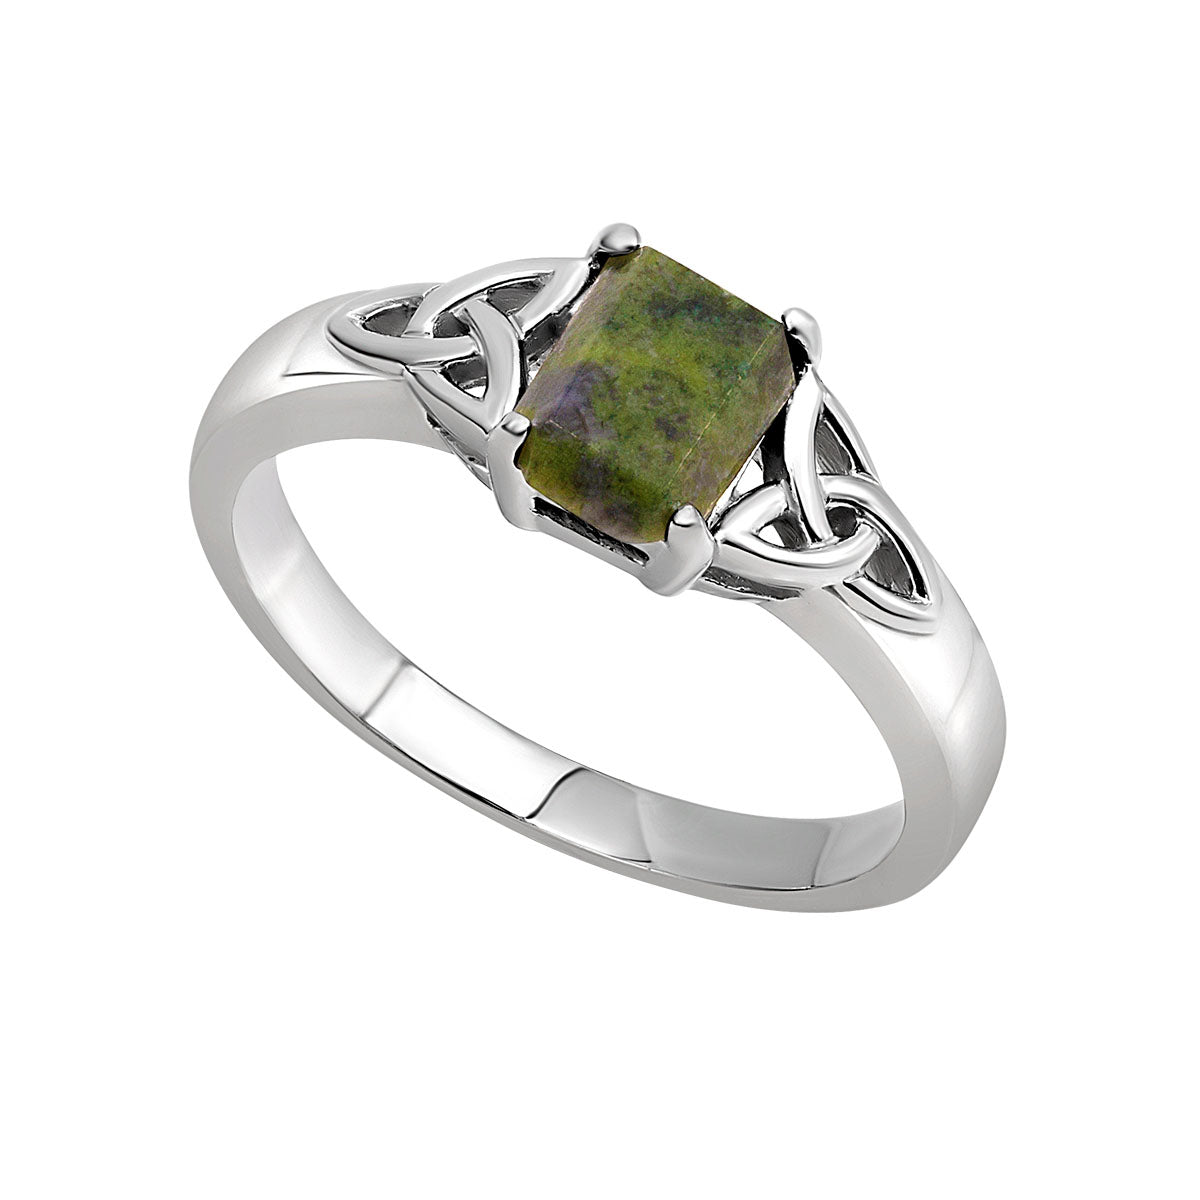 Solvar sterling silver trinity knot ring with Connemara marble stone in the centre